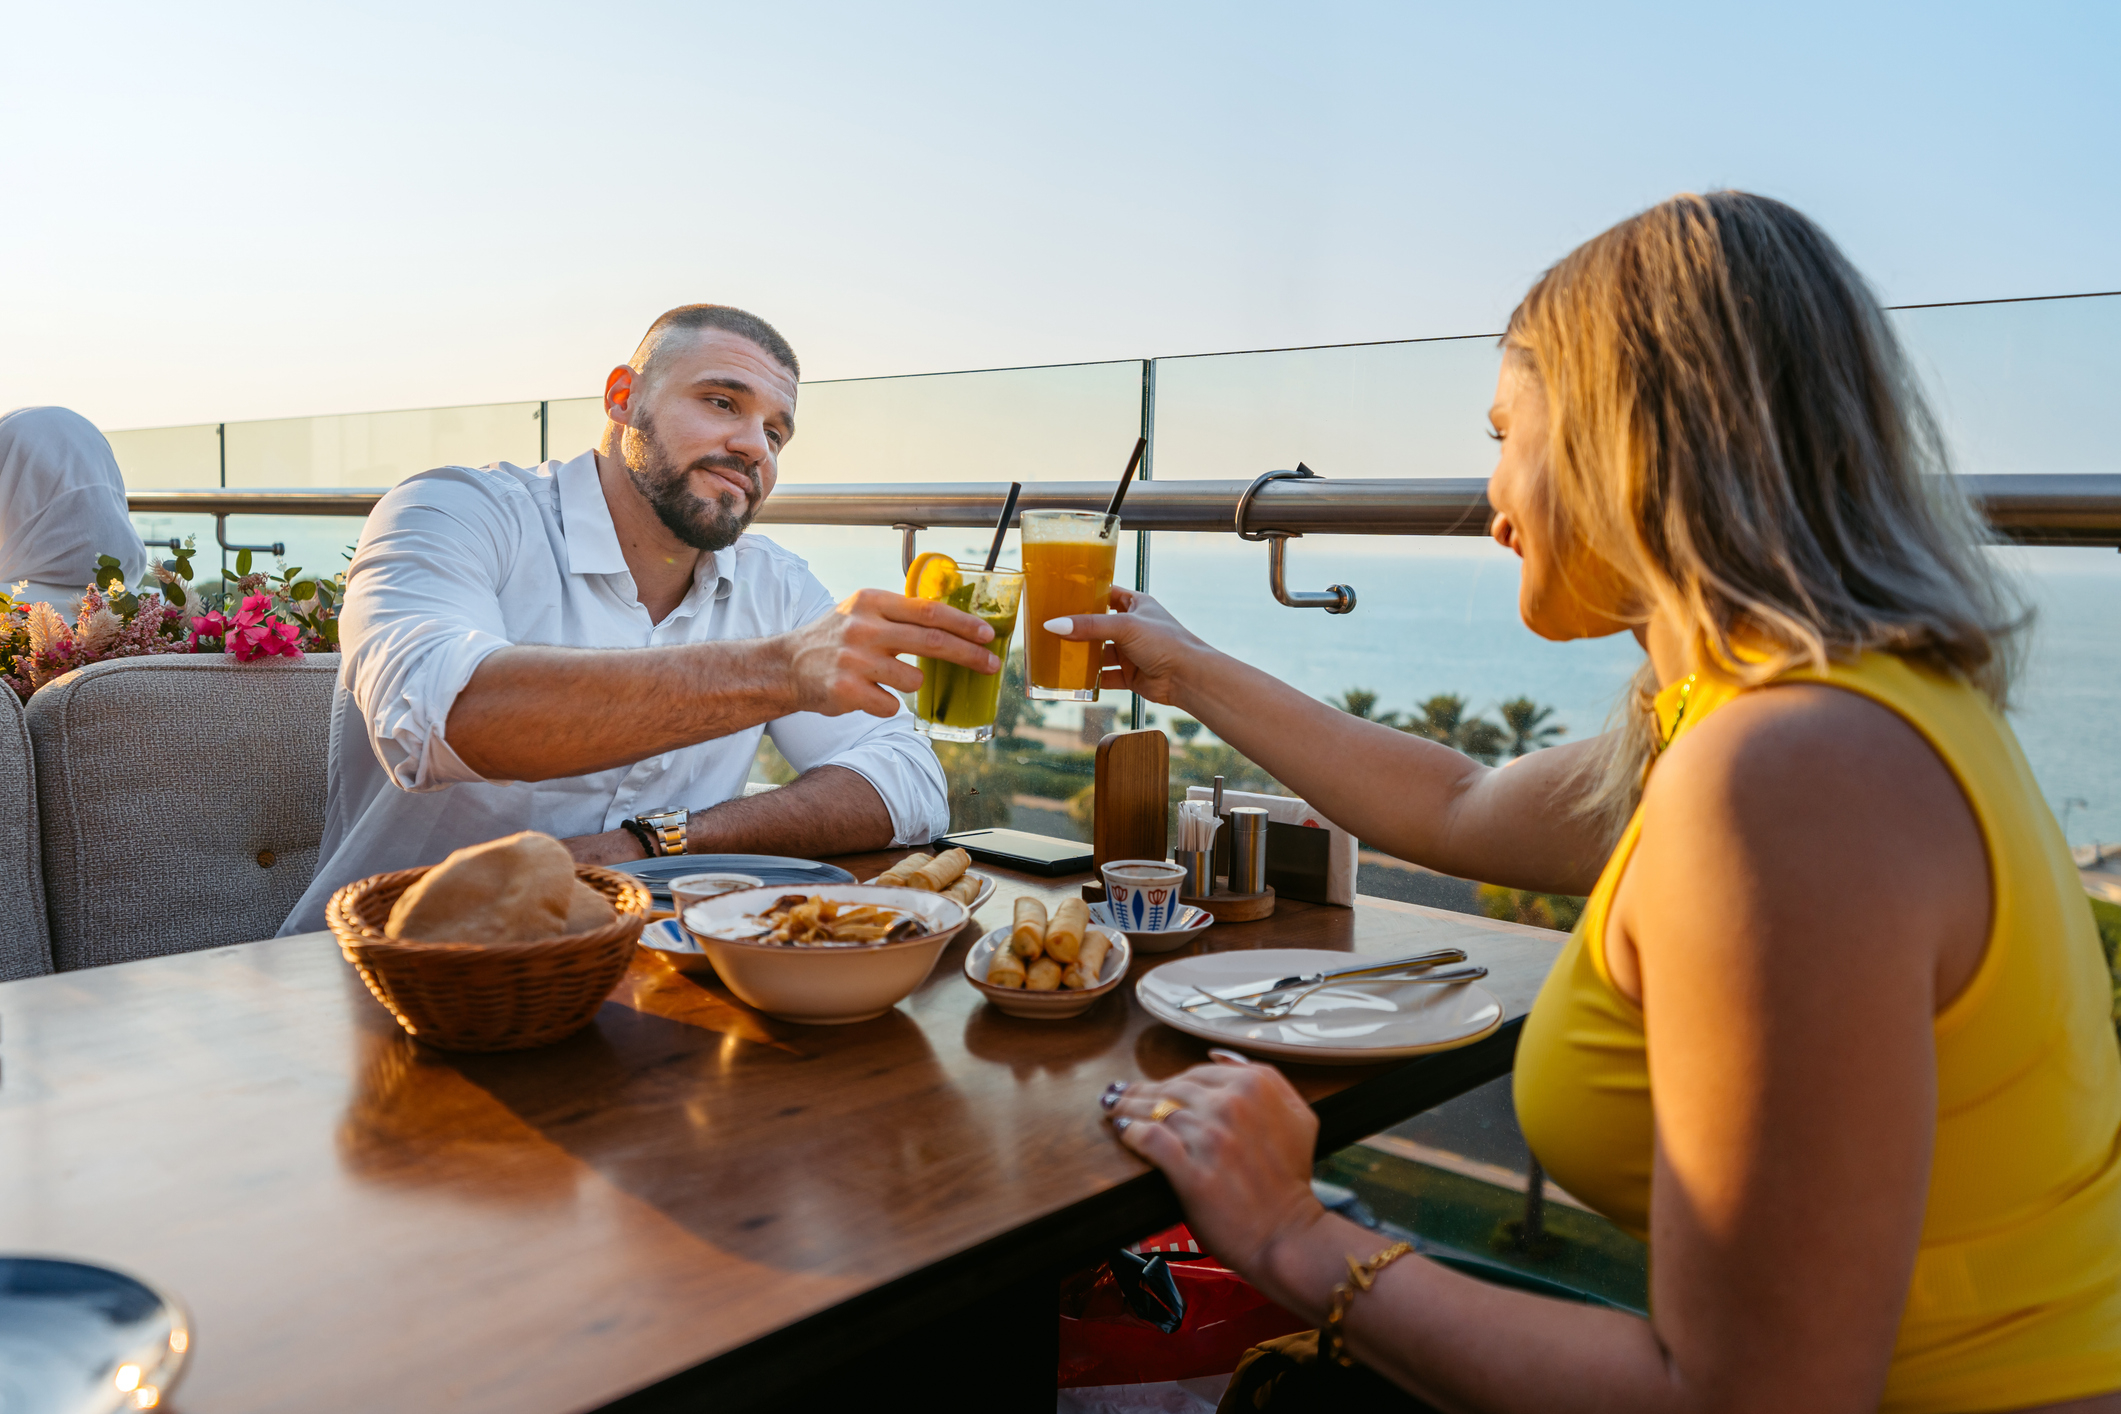 A man and woman share a toast with drinks at an outdoor restaurant by the sea. The table has various dishes and condiments